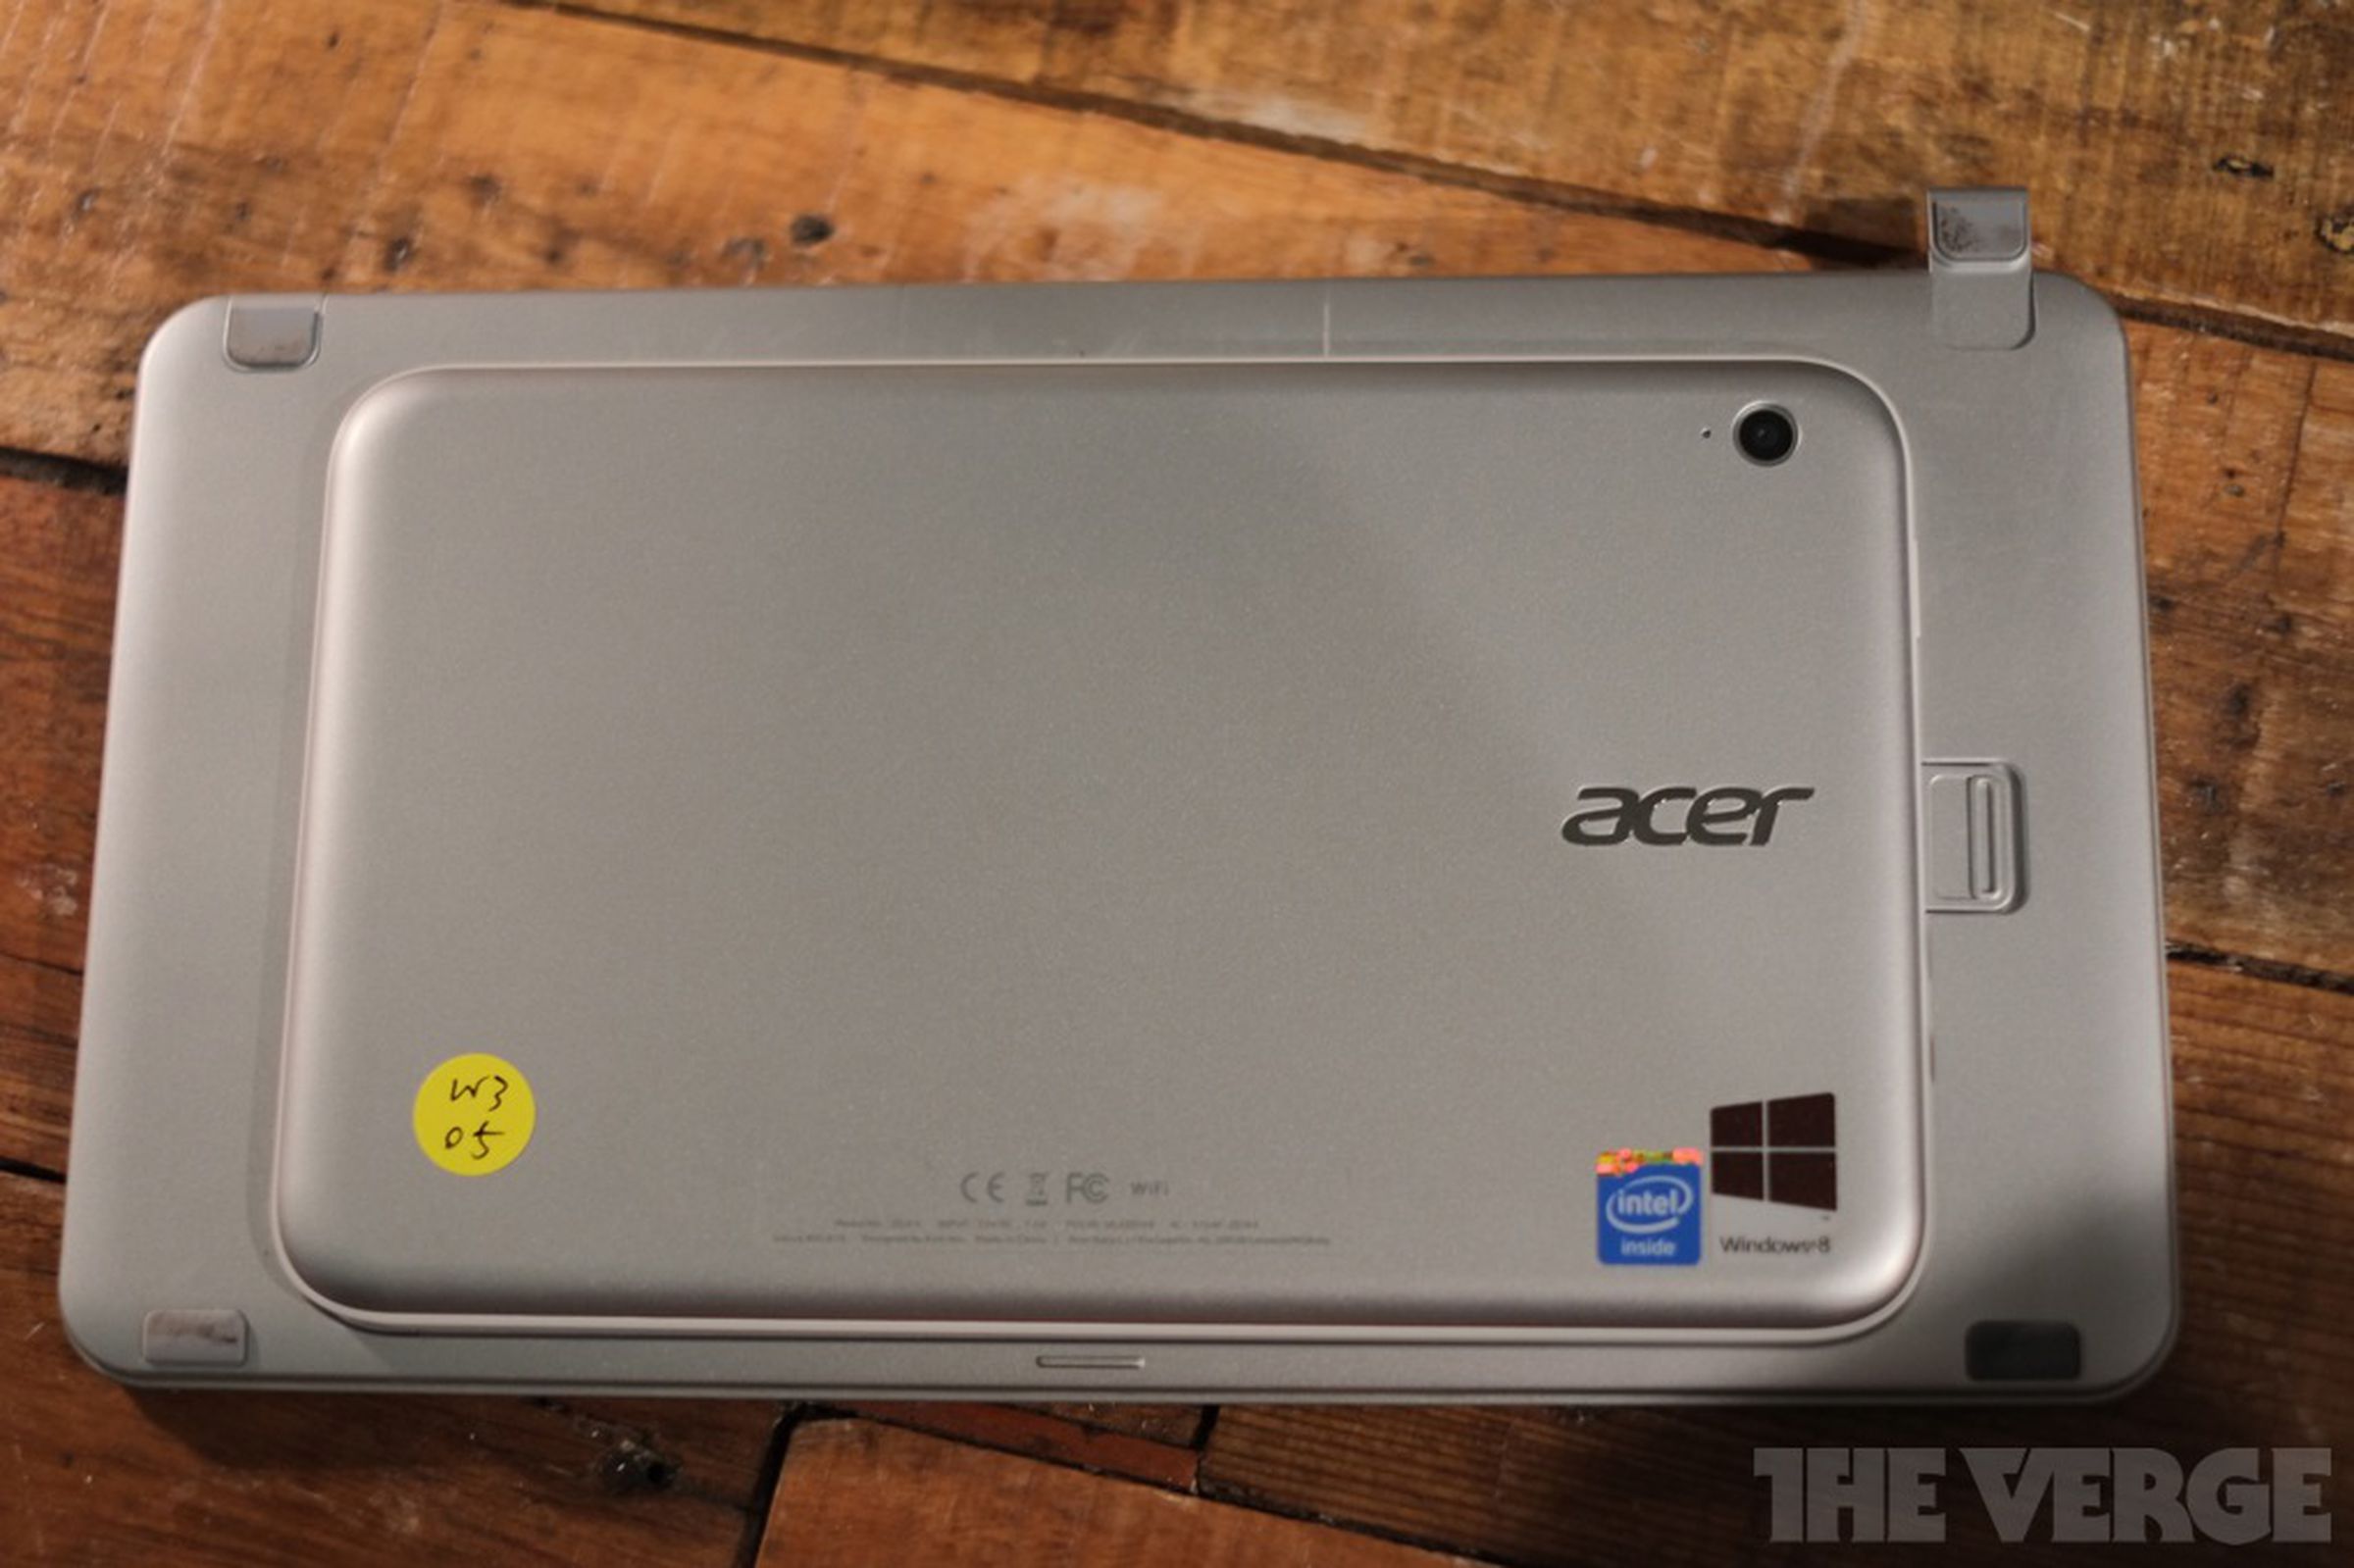 Acer Iconia W3 hands-on photos